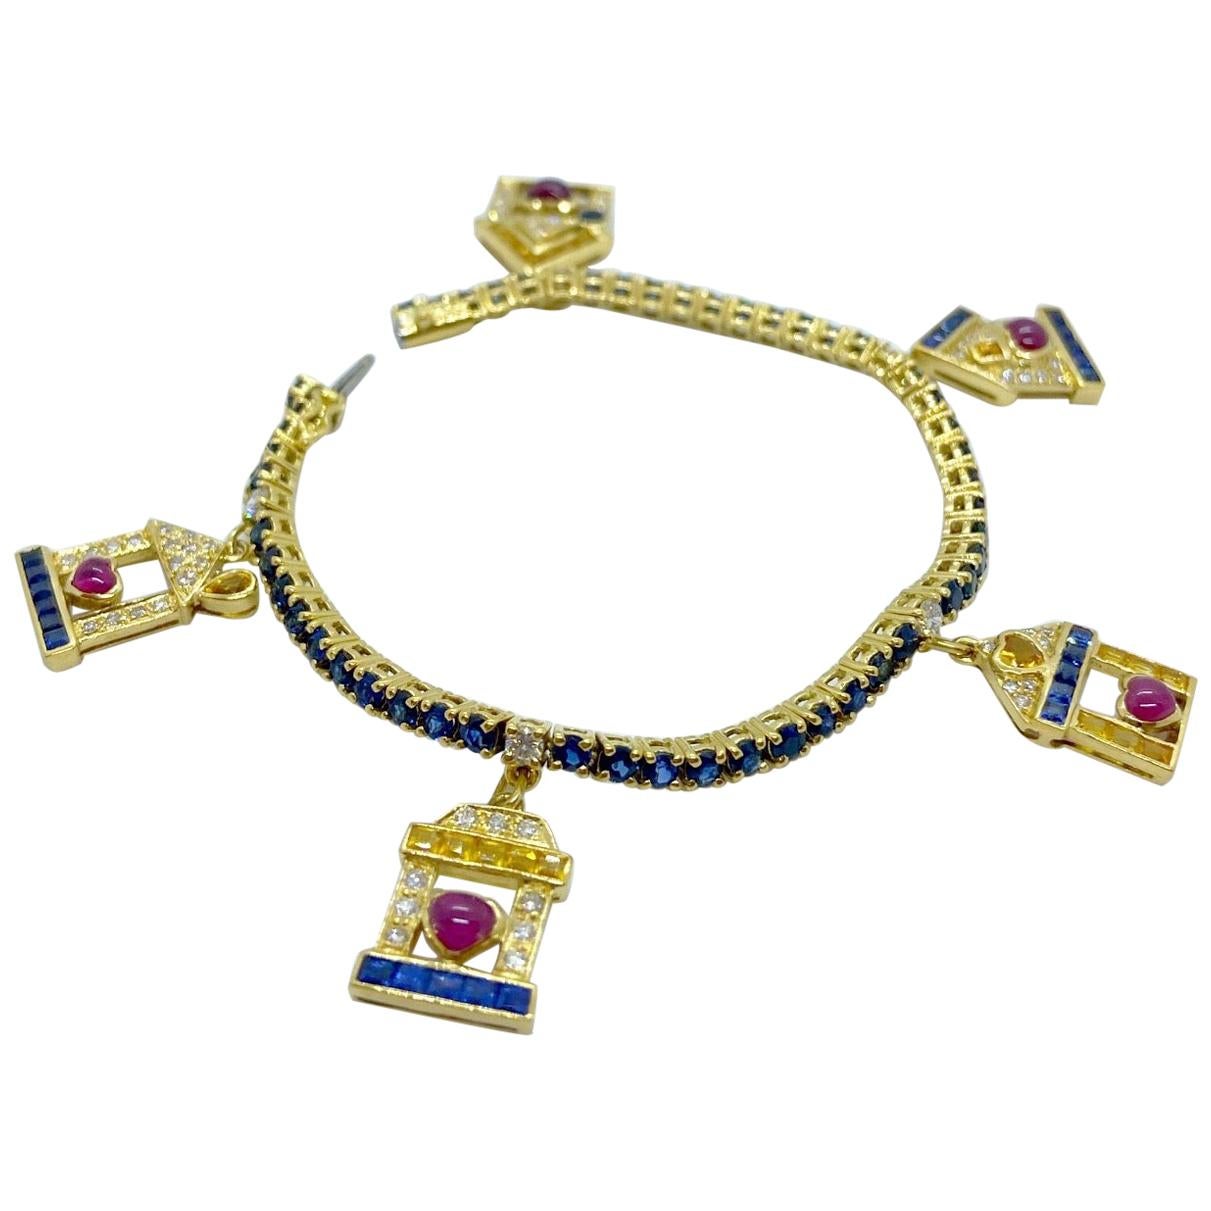 Sabbadini 18 Karat Gold Bracelet with Diamond, Ruby and Sapphire House Charms For Sale